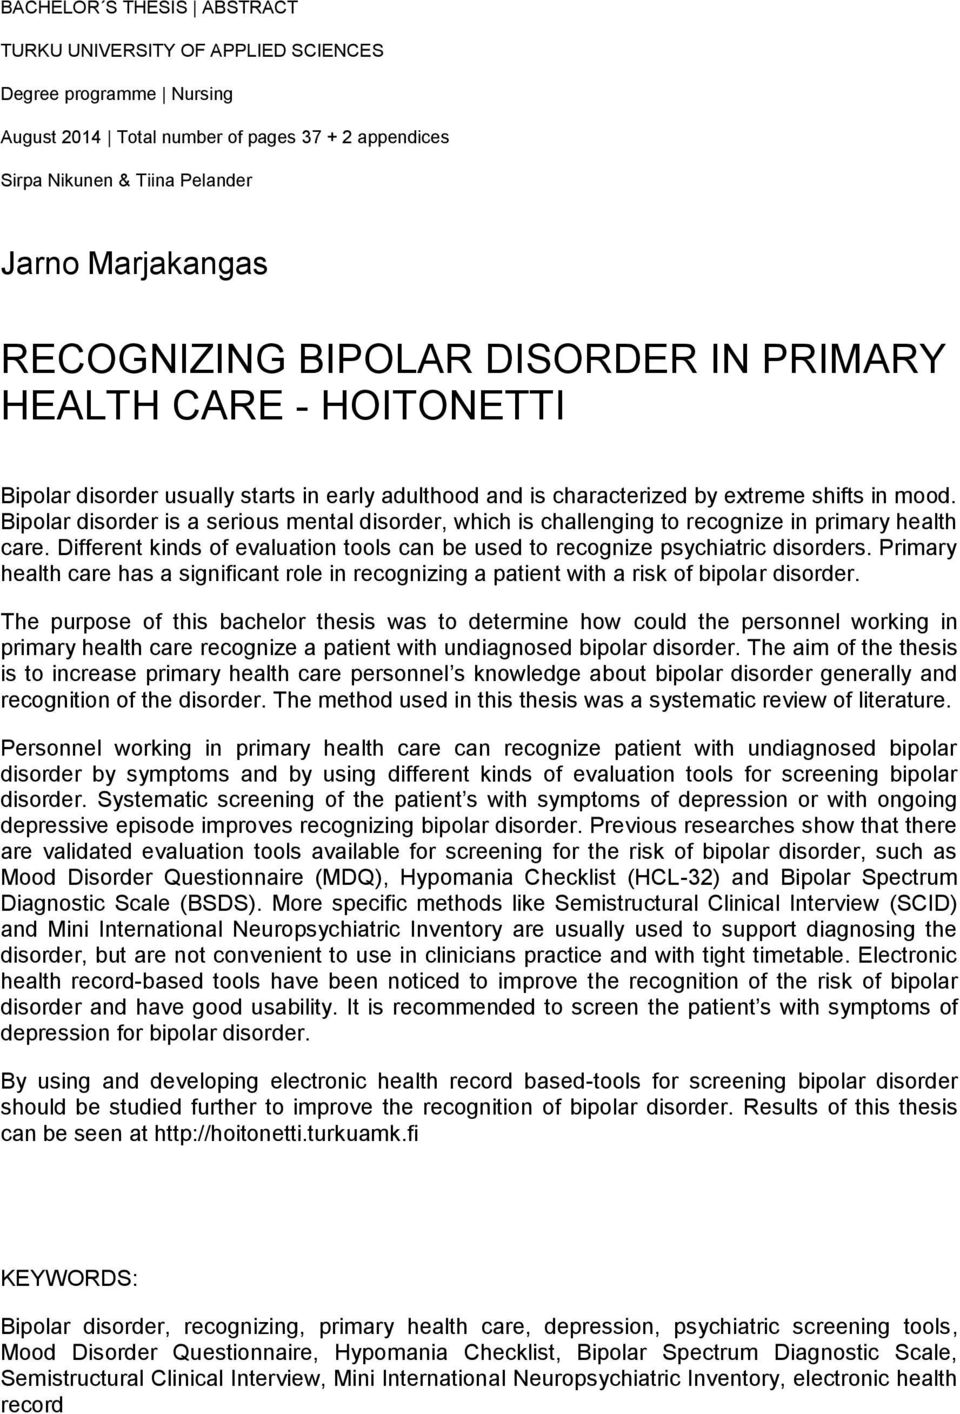 Bipolar disorder is a serious mental disorder, which is challenging to recognize in primary health care. Different kinds of evaluation tools can be used to recognize psychiatric disorders.